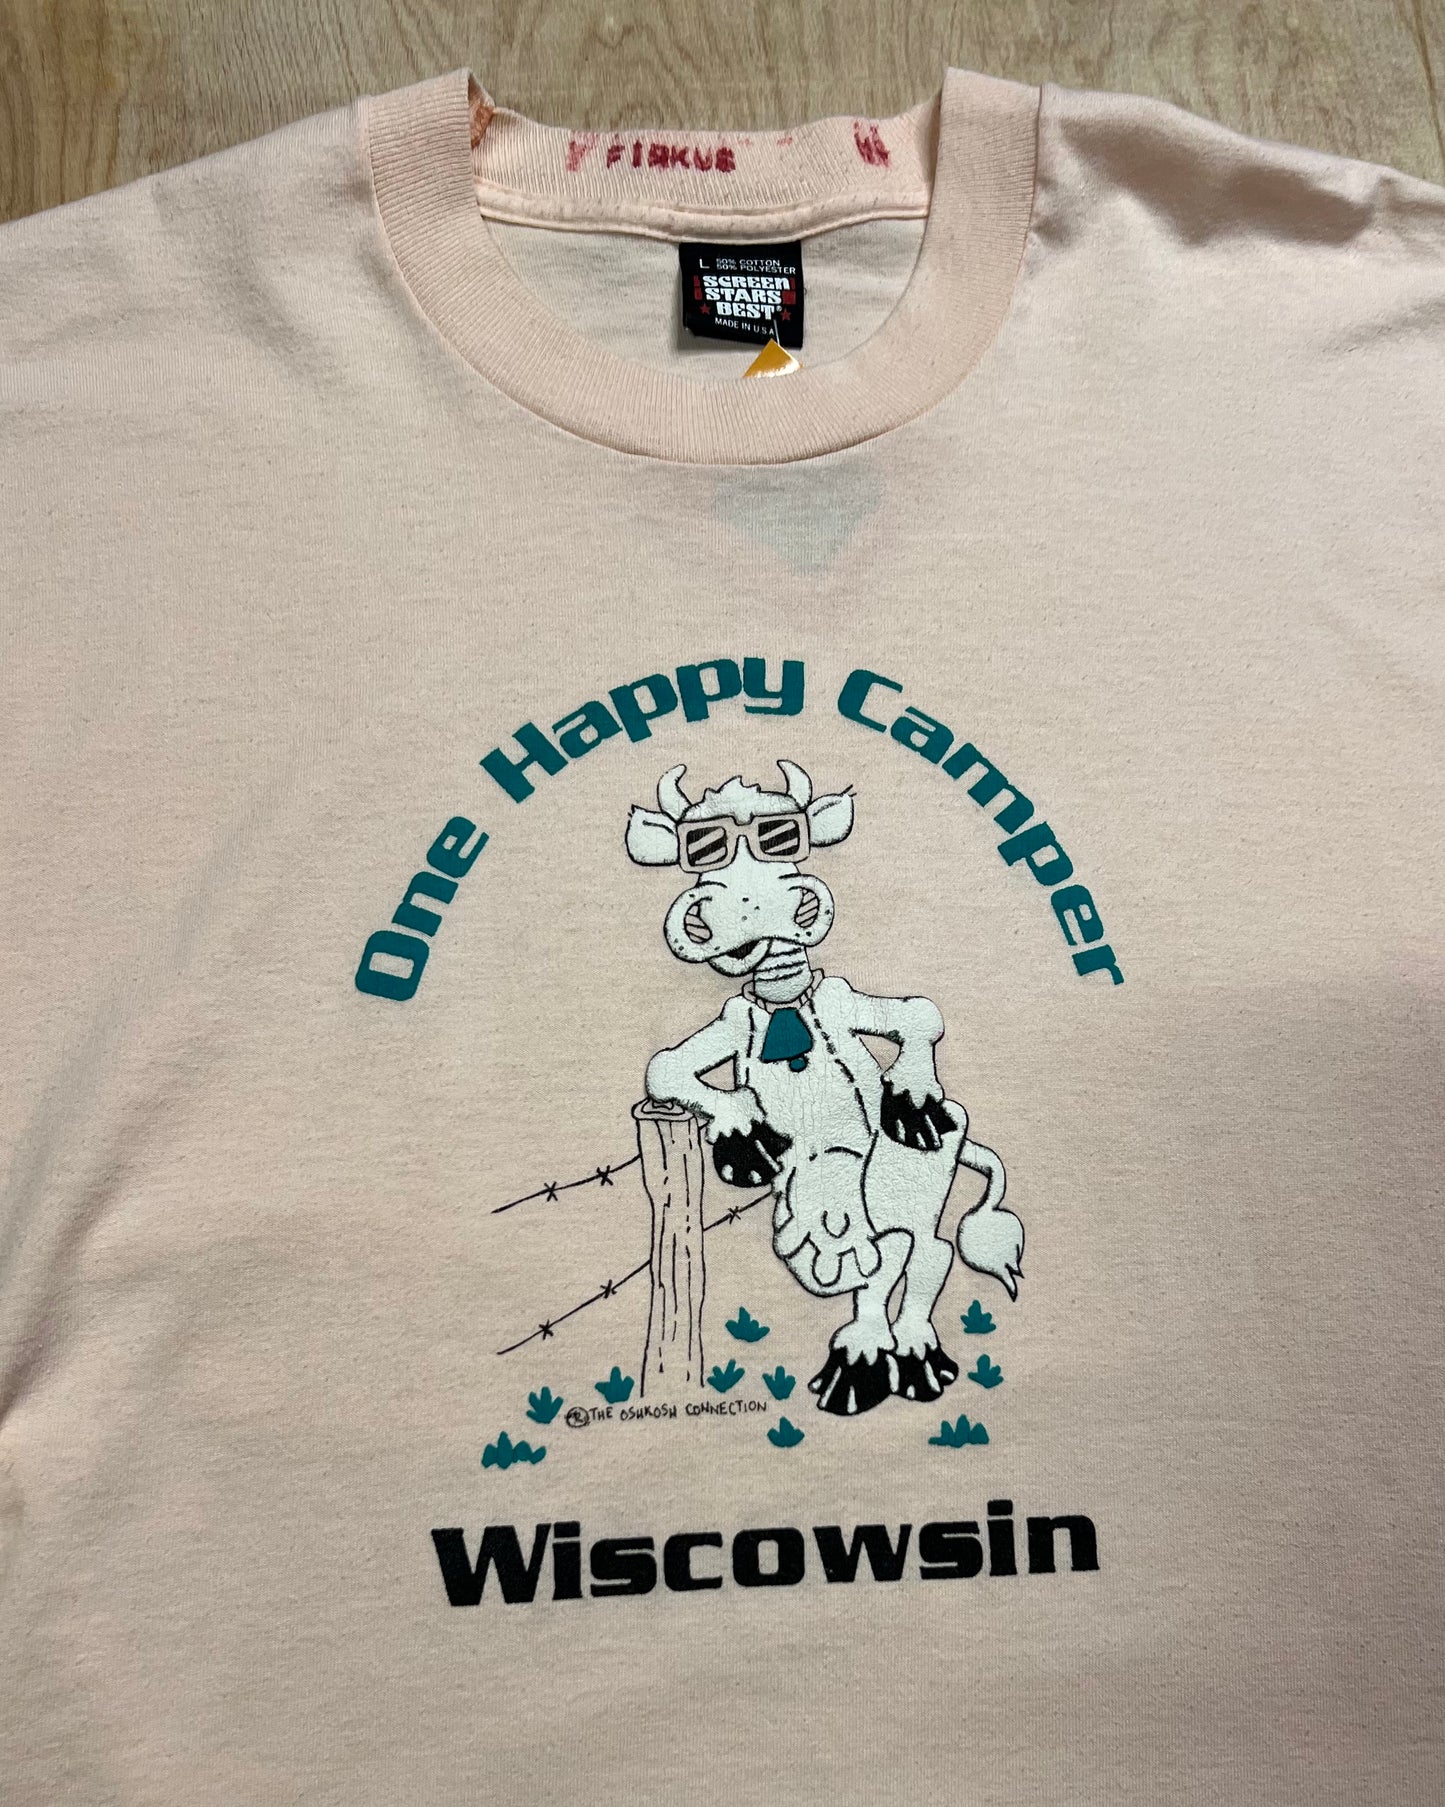 Vintage Early 1990's Wiscowsin "One Happy Camper" Single Stitch T-Shirt